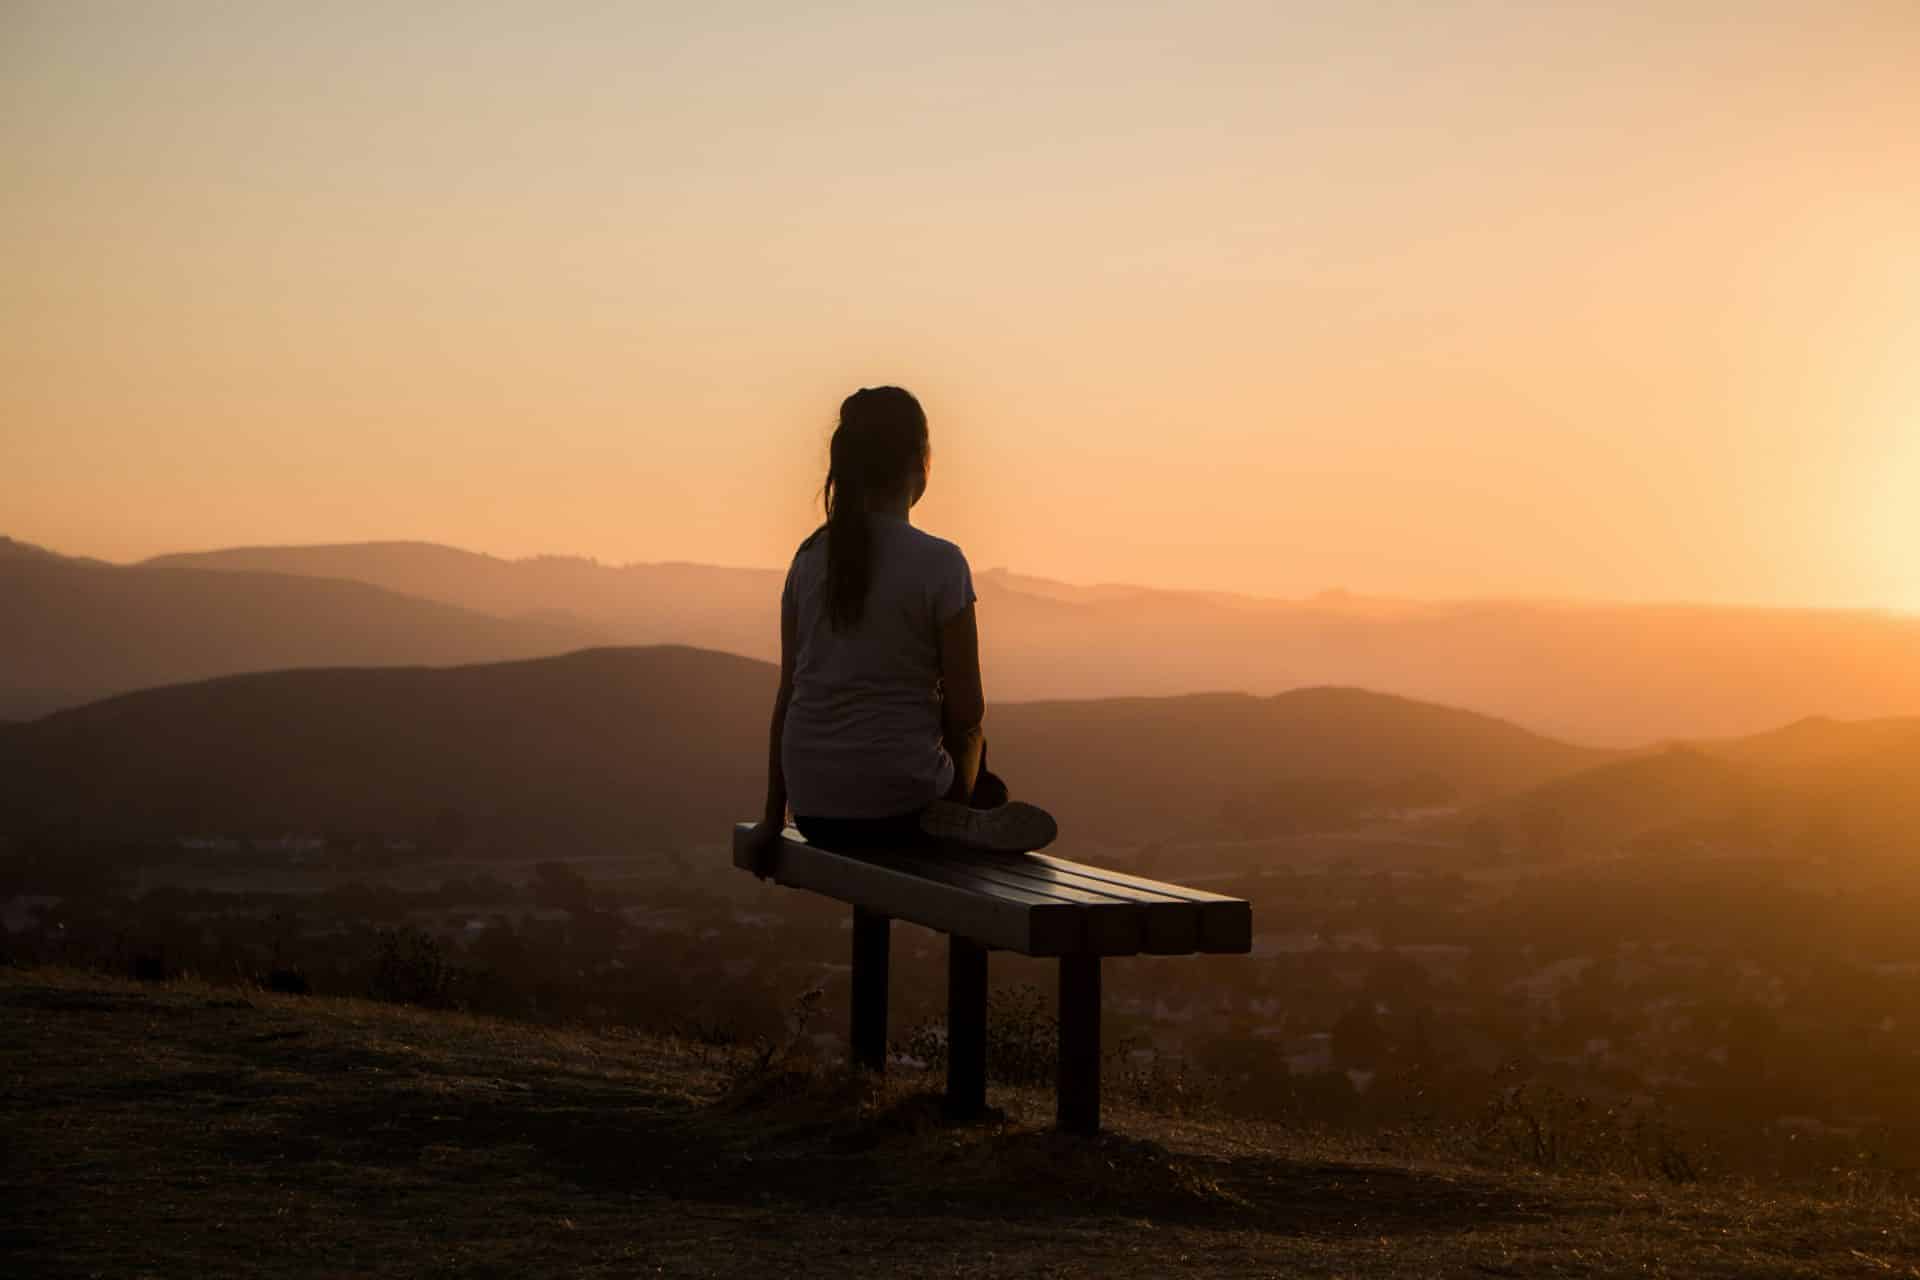 A woman sitting with her legs up on a bench overlooking a beautiful sunset across hills